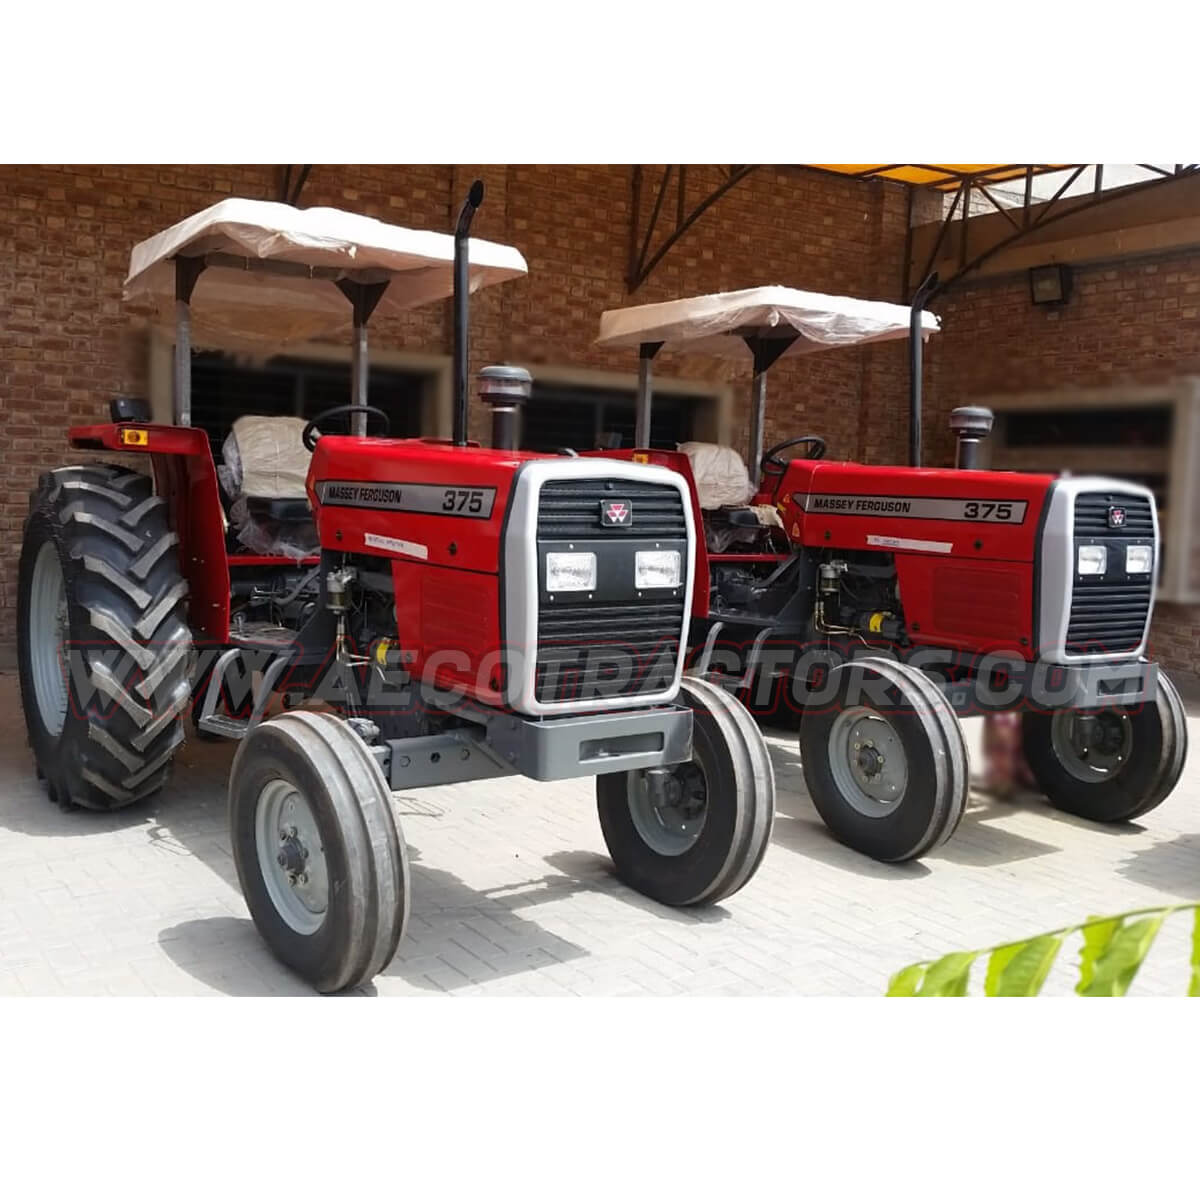 MF 375 TRACTOR FOR SALE